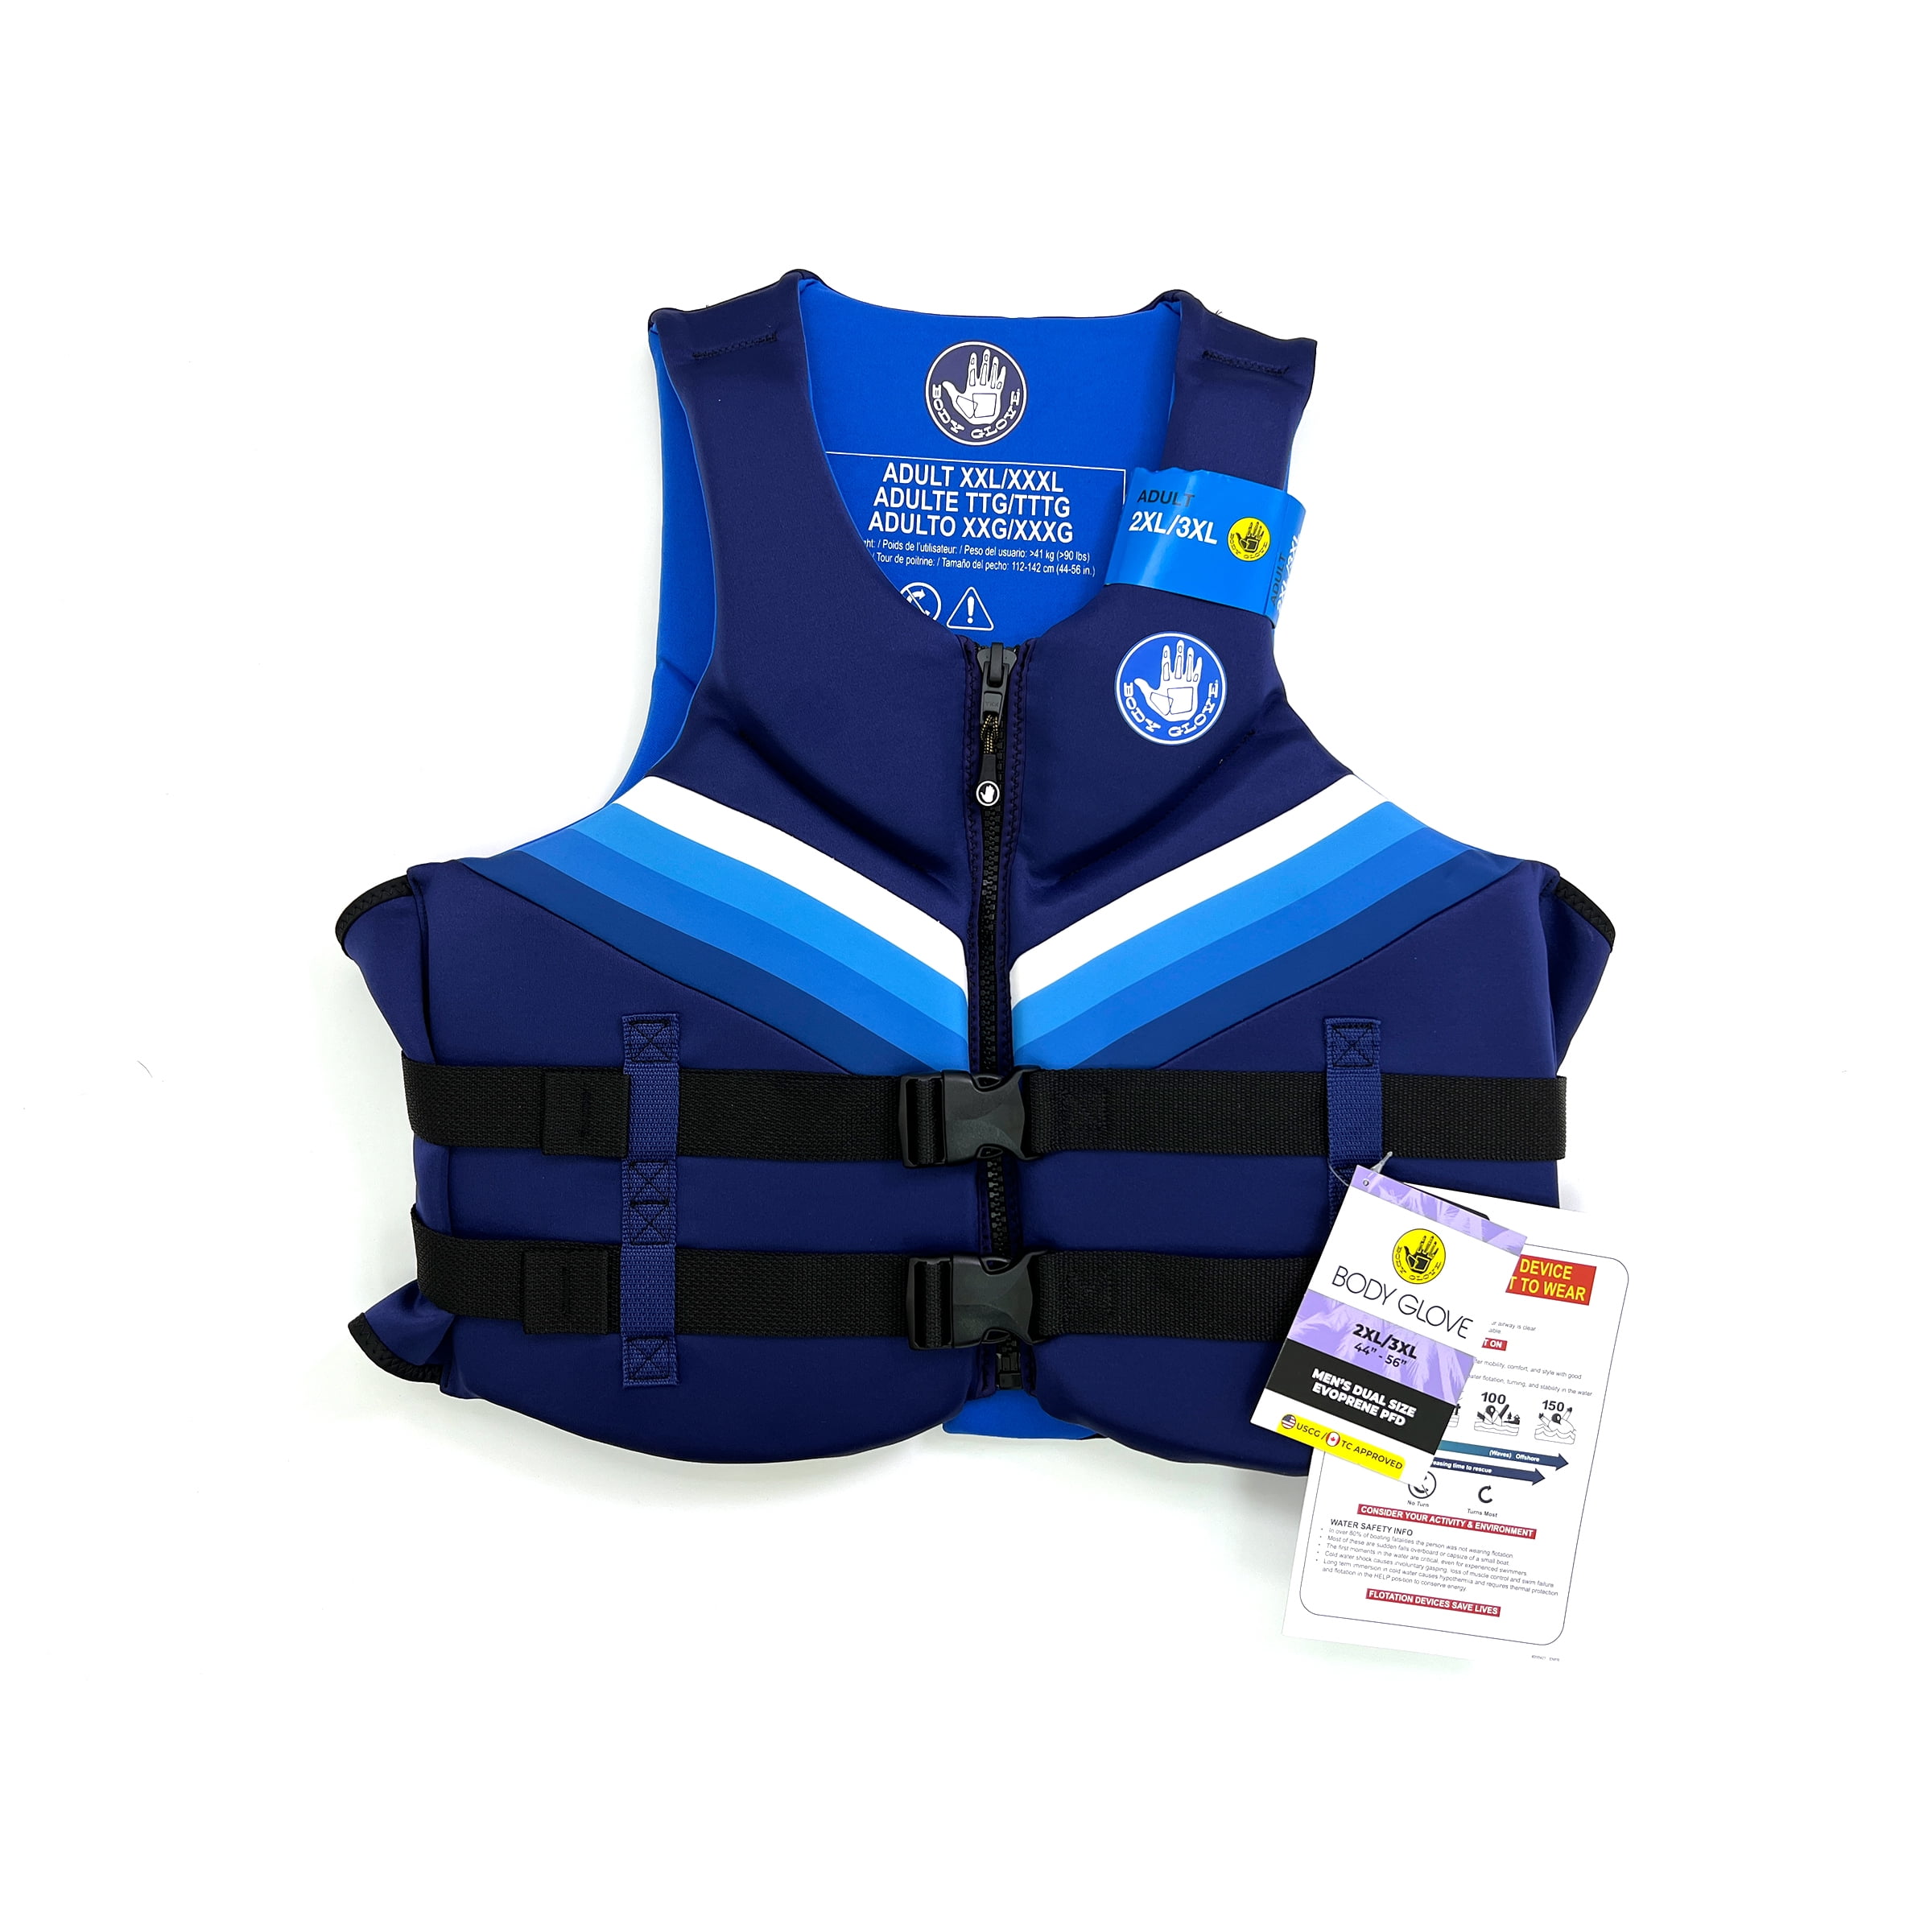 Galapare Water Sports Life Jackets Vest Buoyancy Life Saving Swimming Vest for Kids/Adults Fishing Boating Kayaking Surfing Swimming